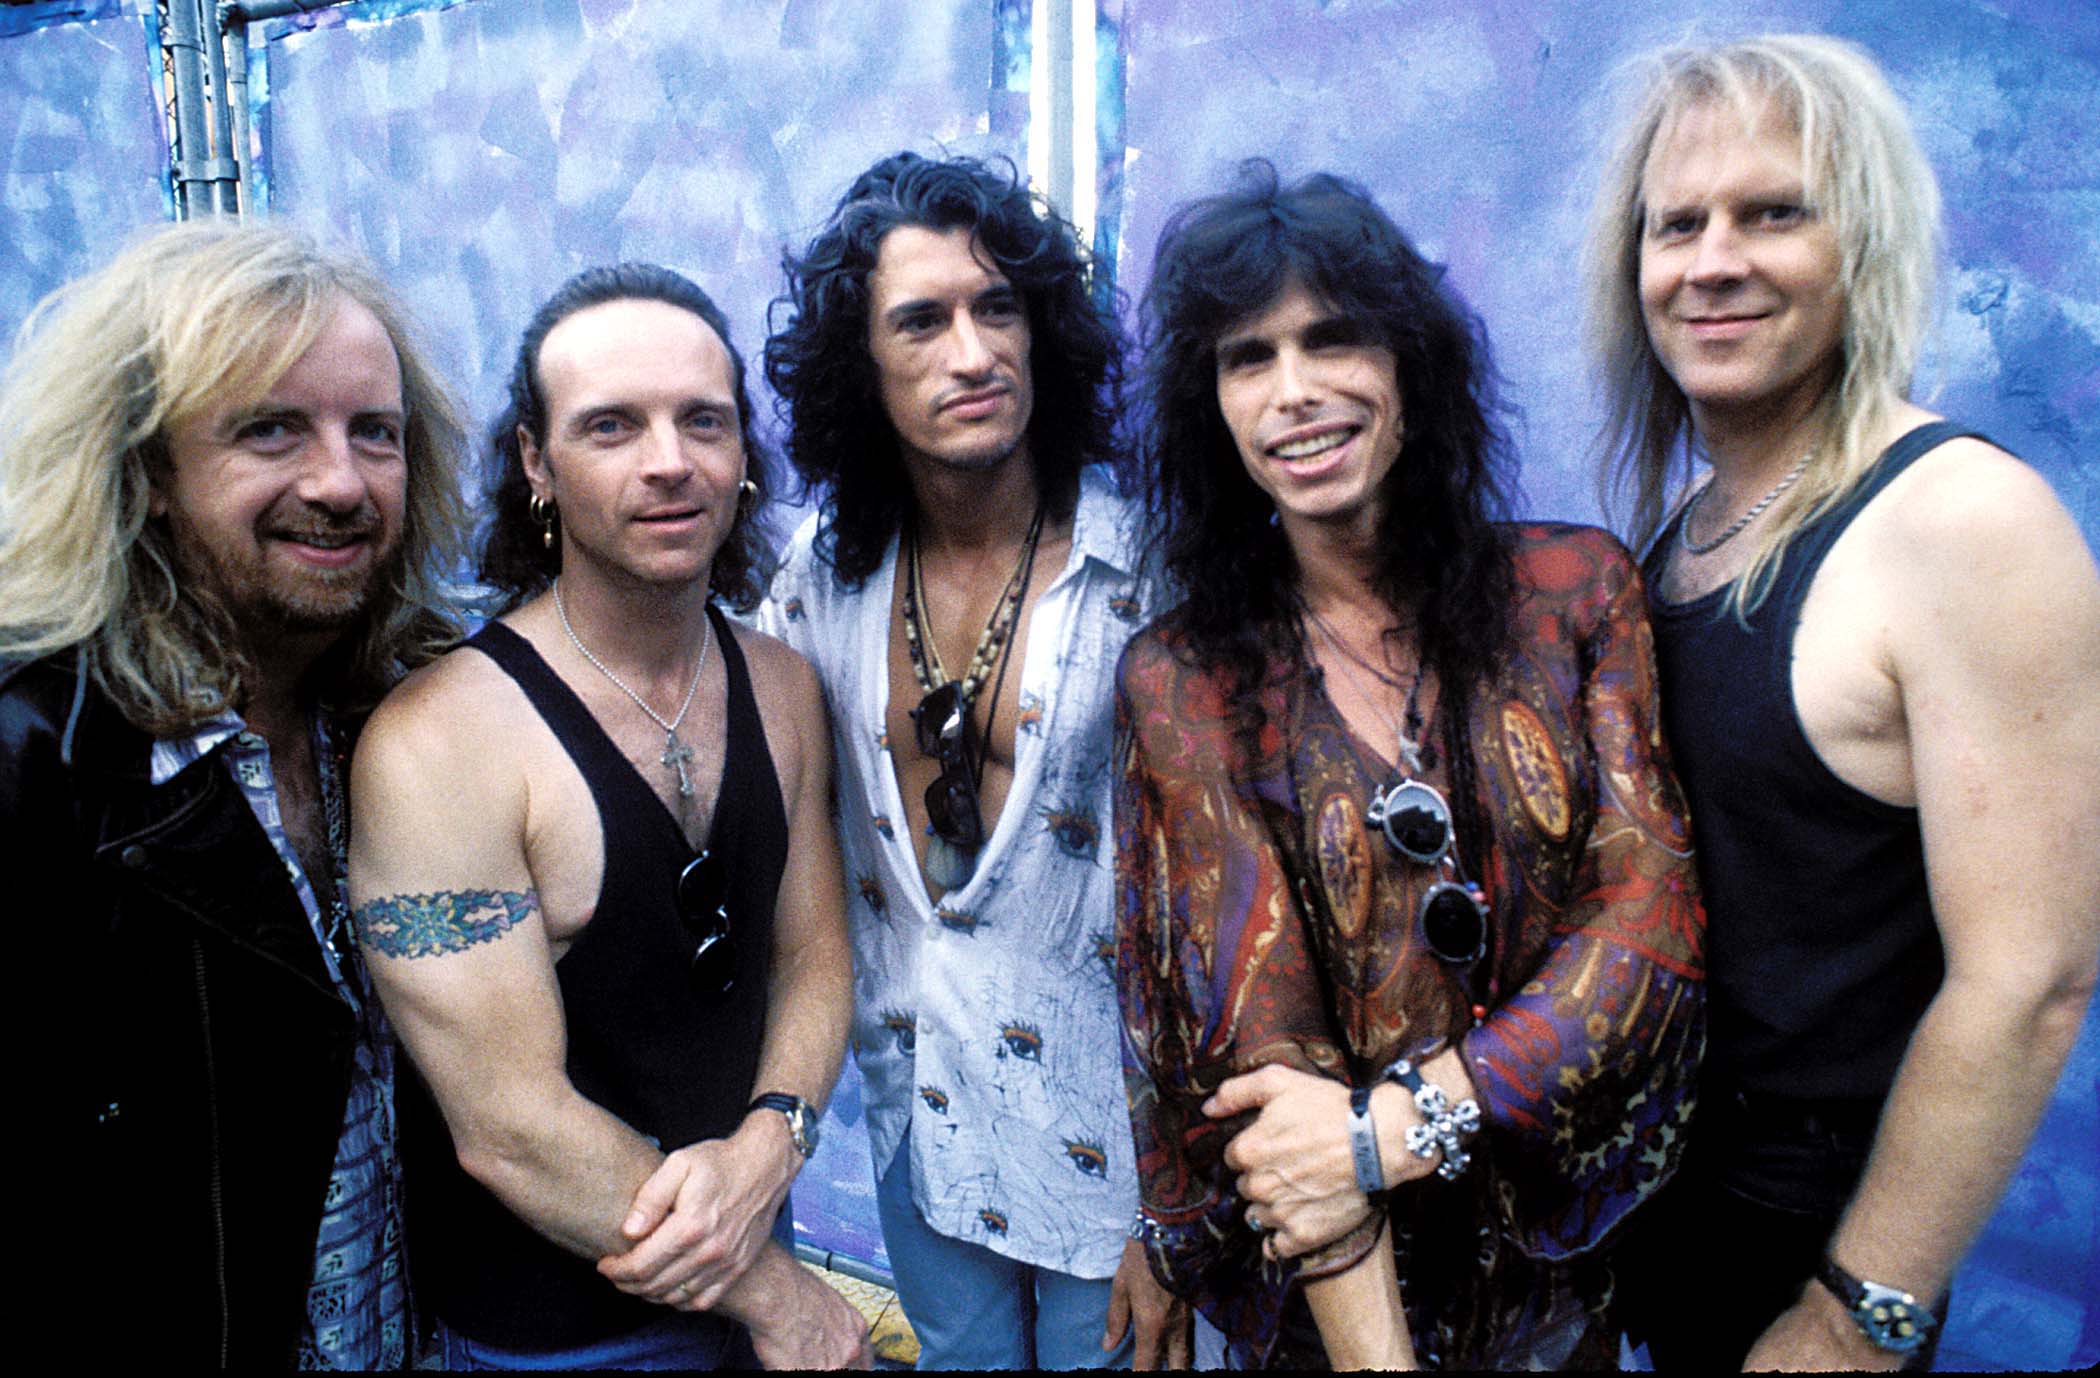 Aerosmith during the "Crazy" era with a blue background